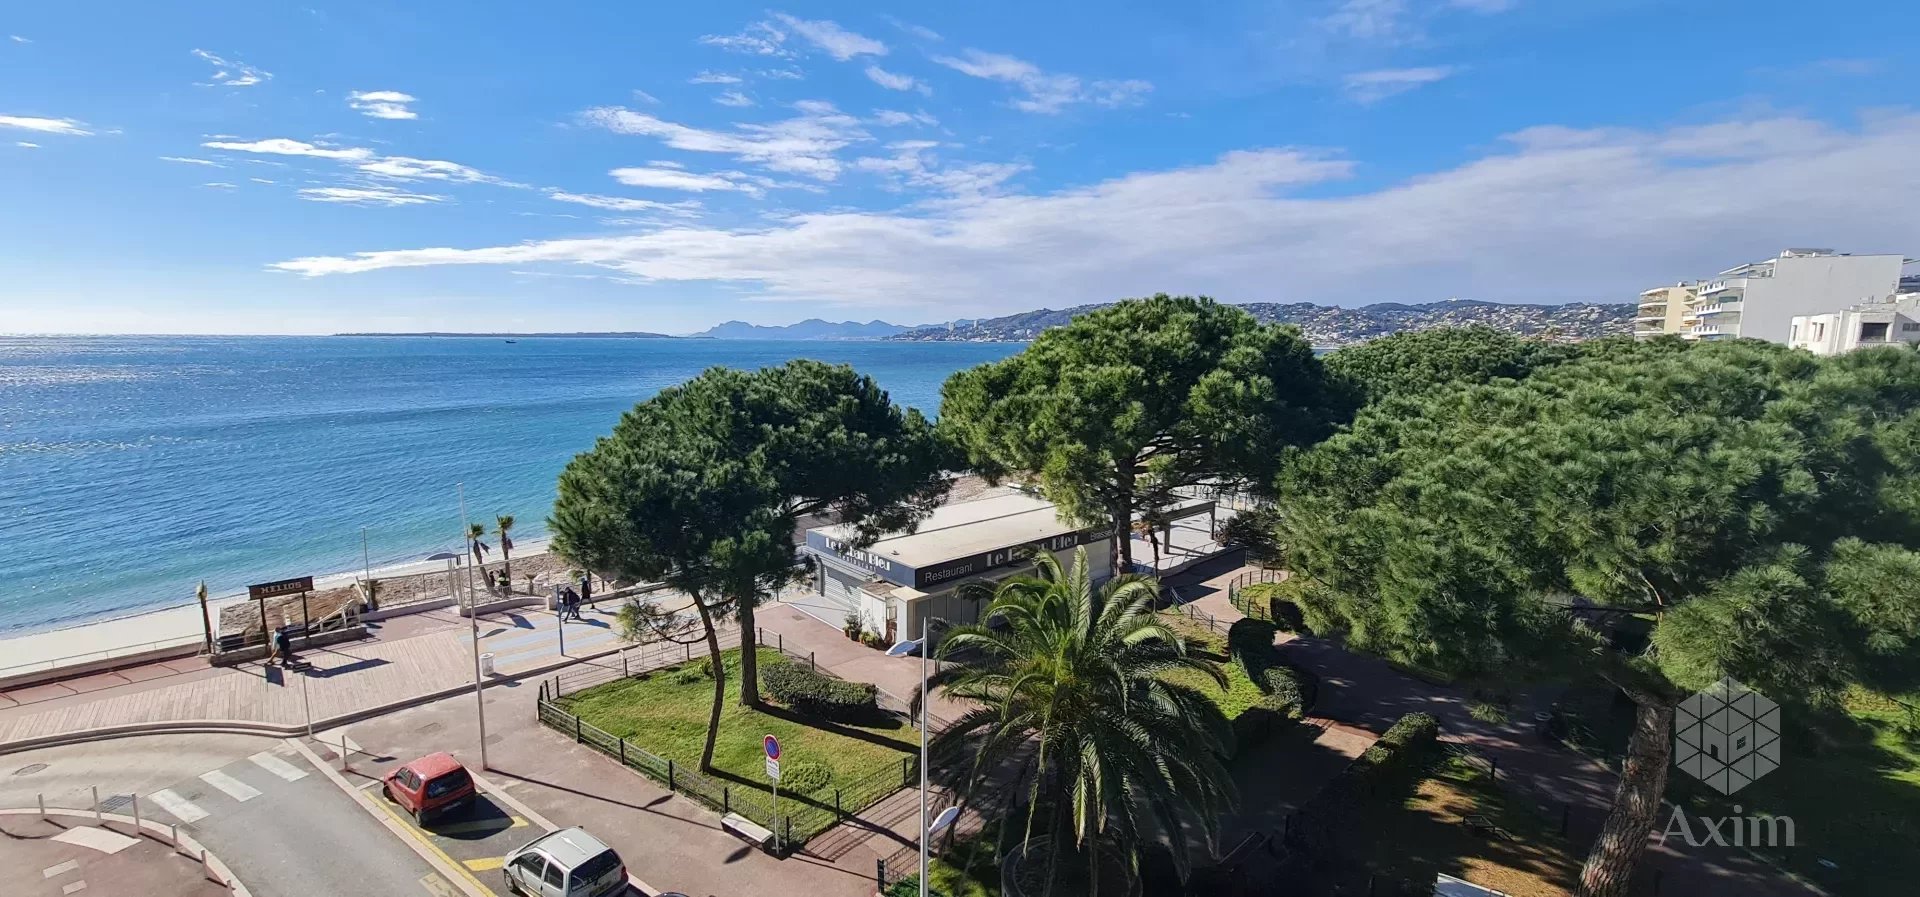 Apartment with sea view in front of Juan les pins beach.